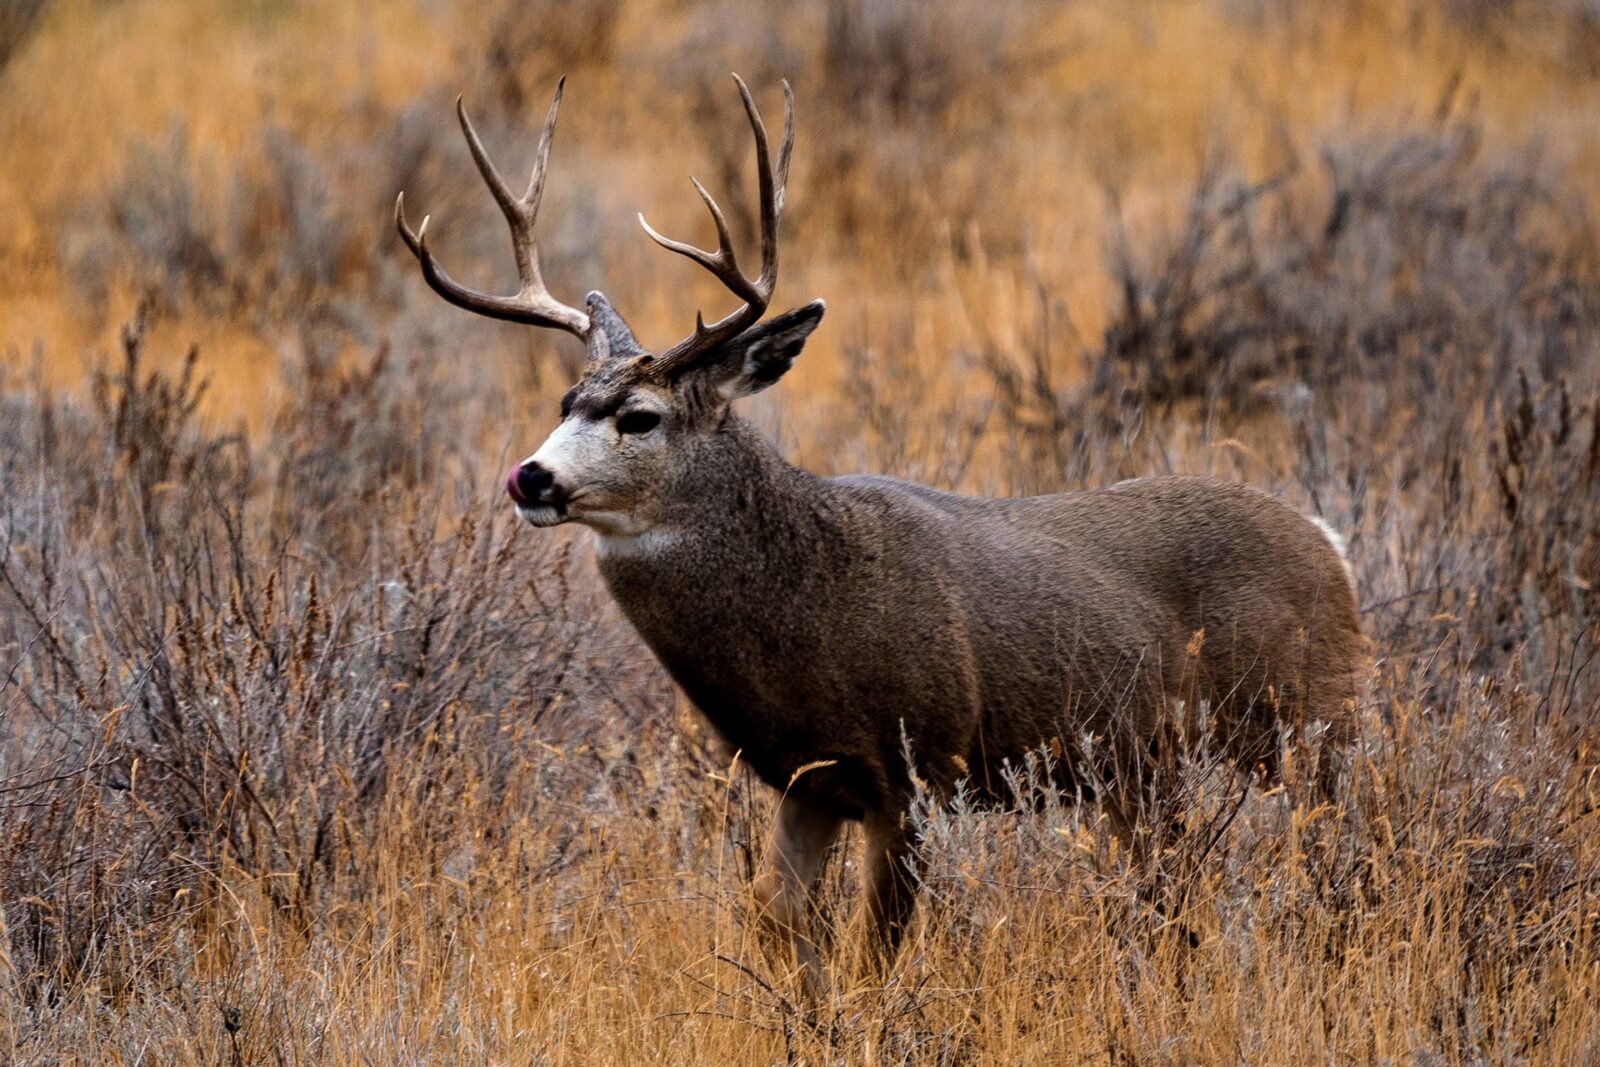 Utah: Best State for Ample Places to Hunt